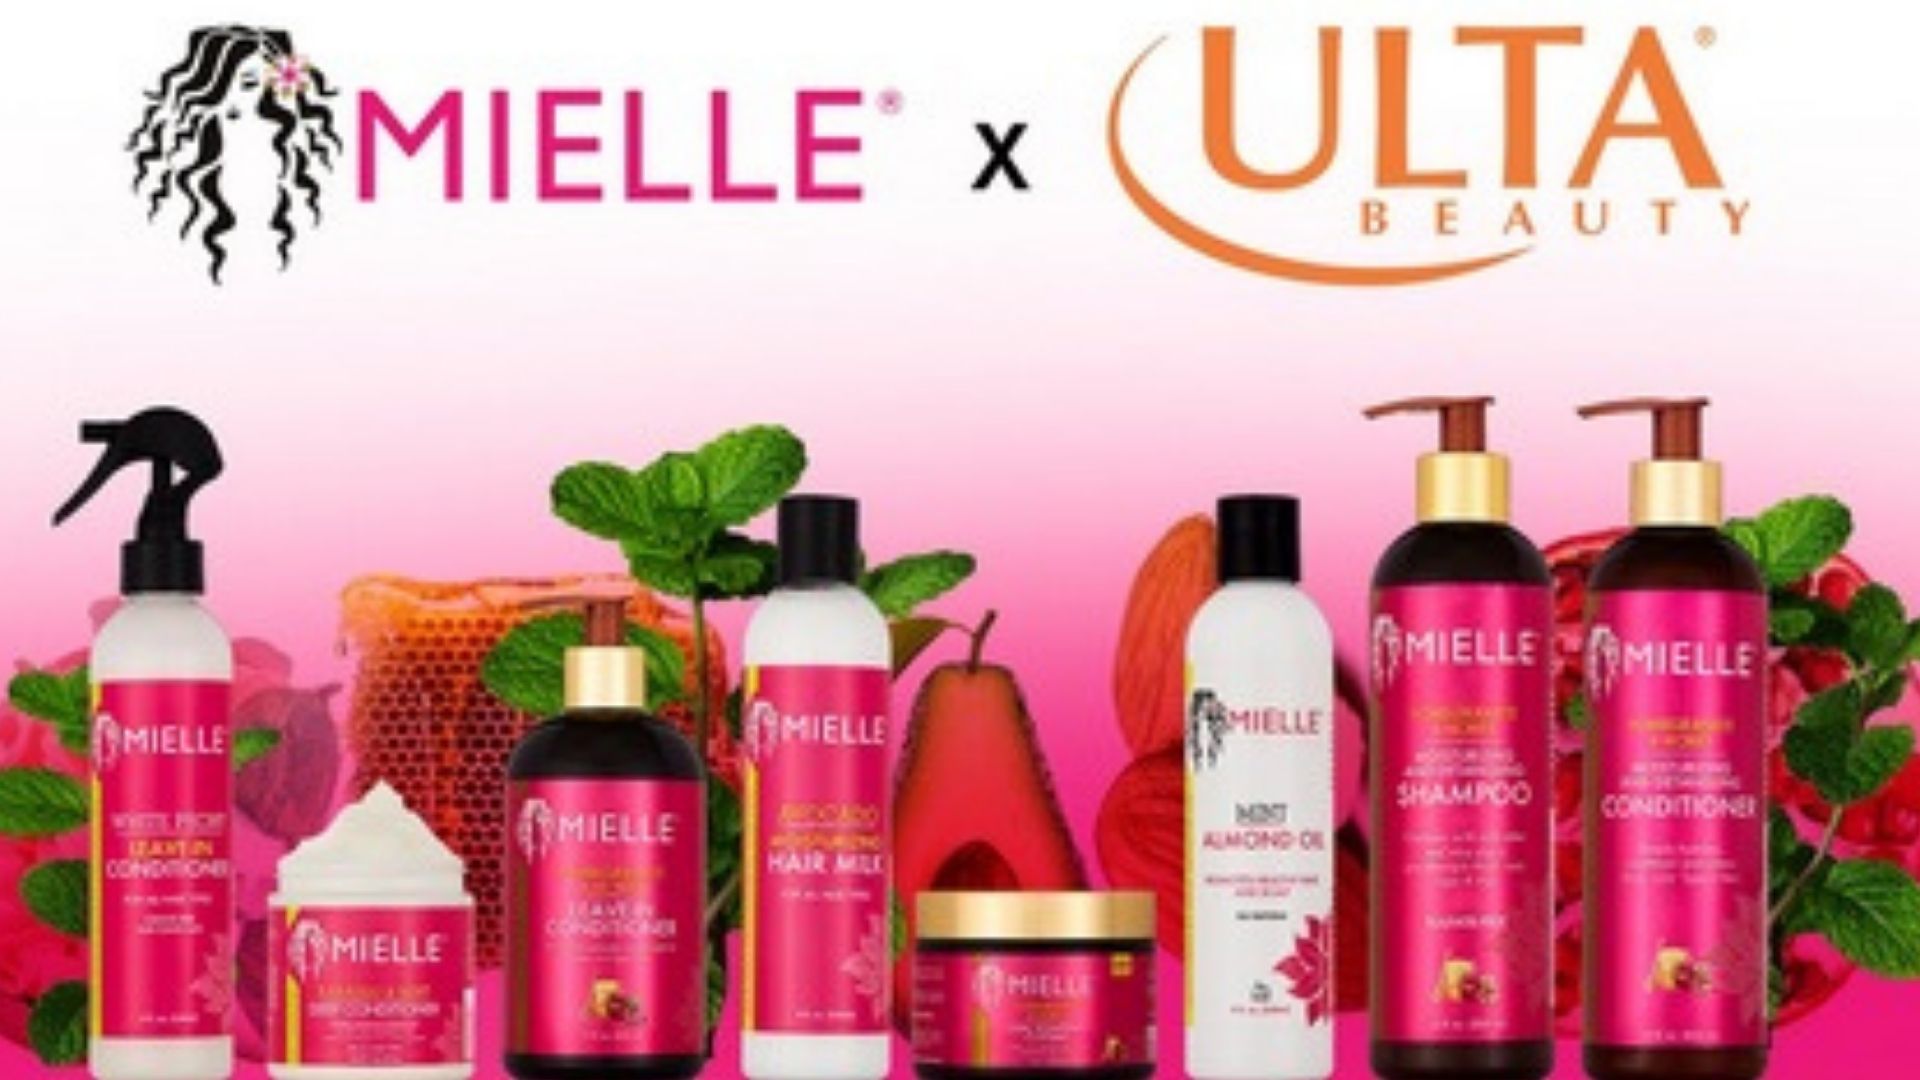 Mielle Organics And P&G Beauty Join Forces With Historic Partnership